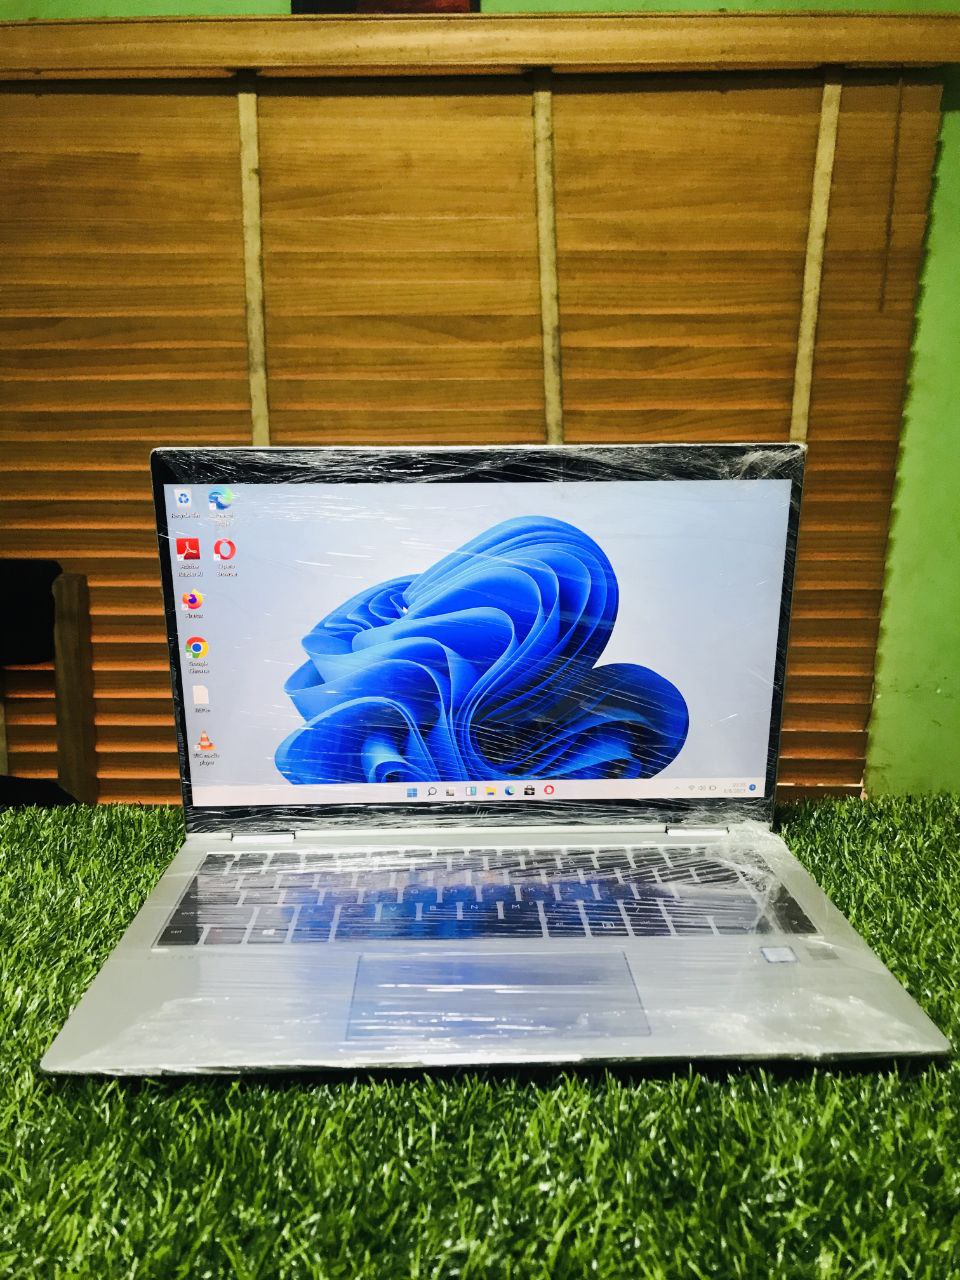 Available UK Used Laptops - Gigabyte Computer Solutions